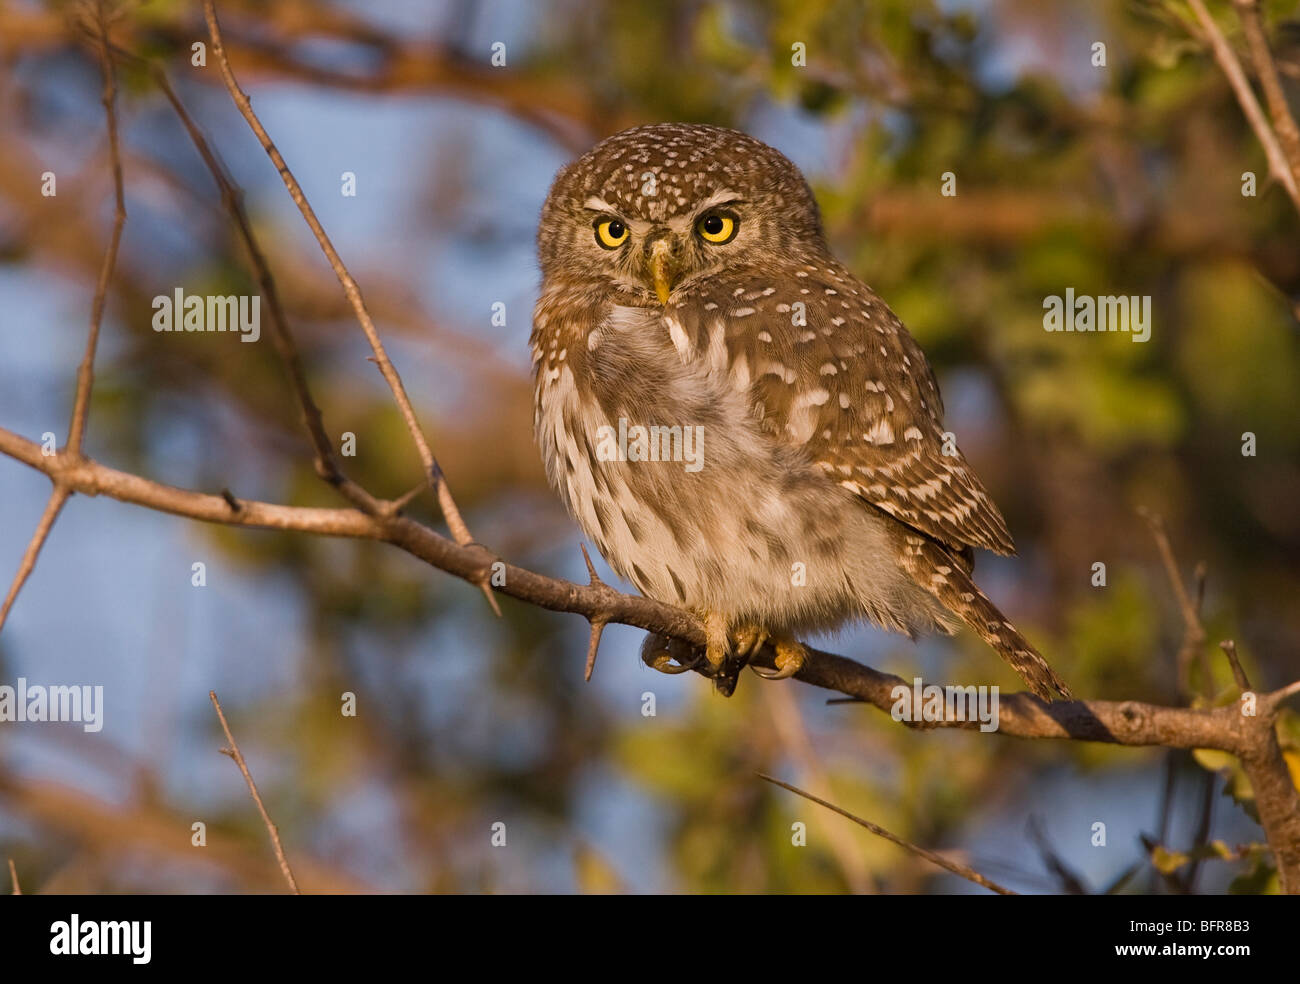 Pearl-spotted owlet Stock Photo